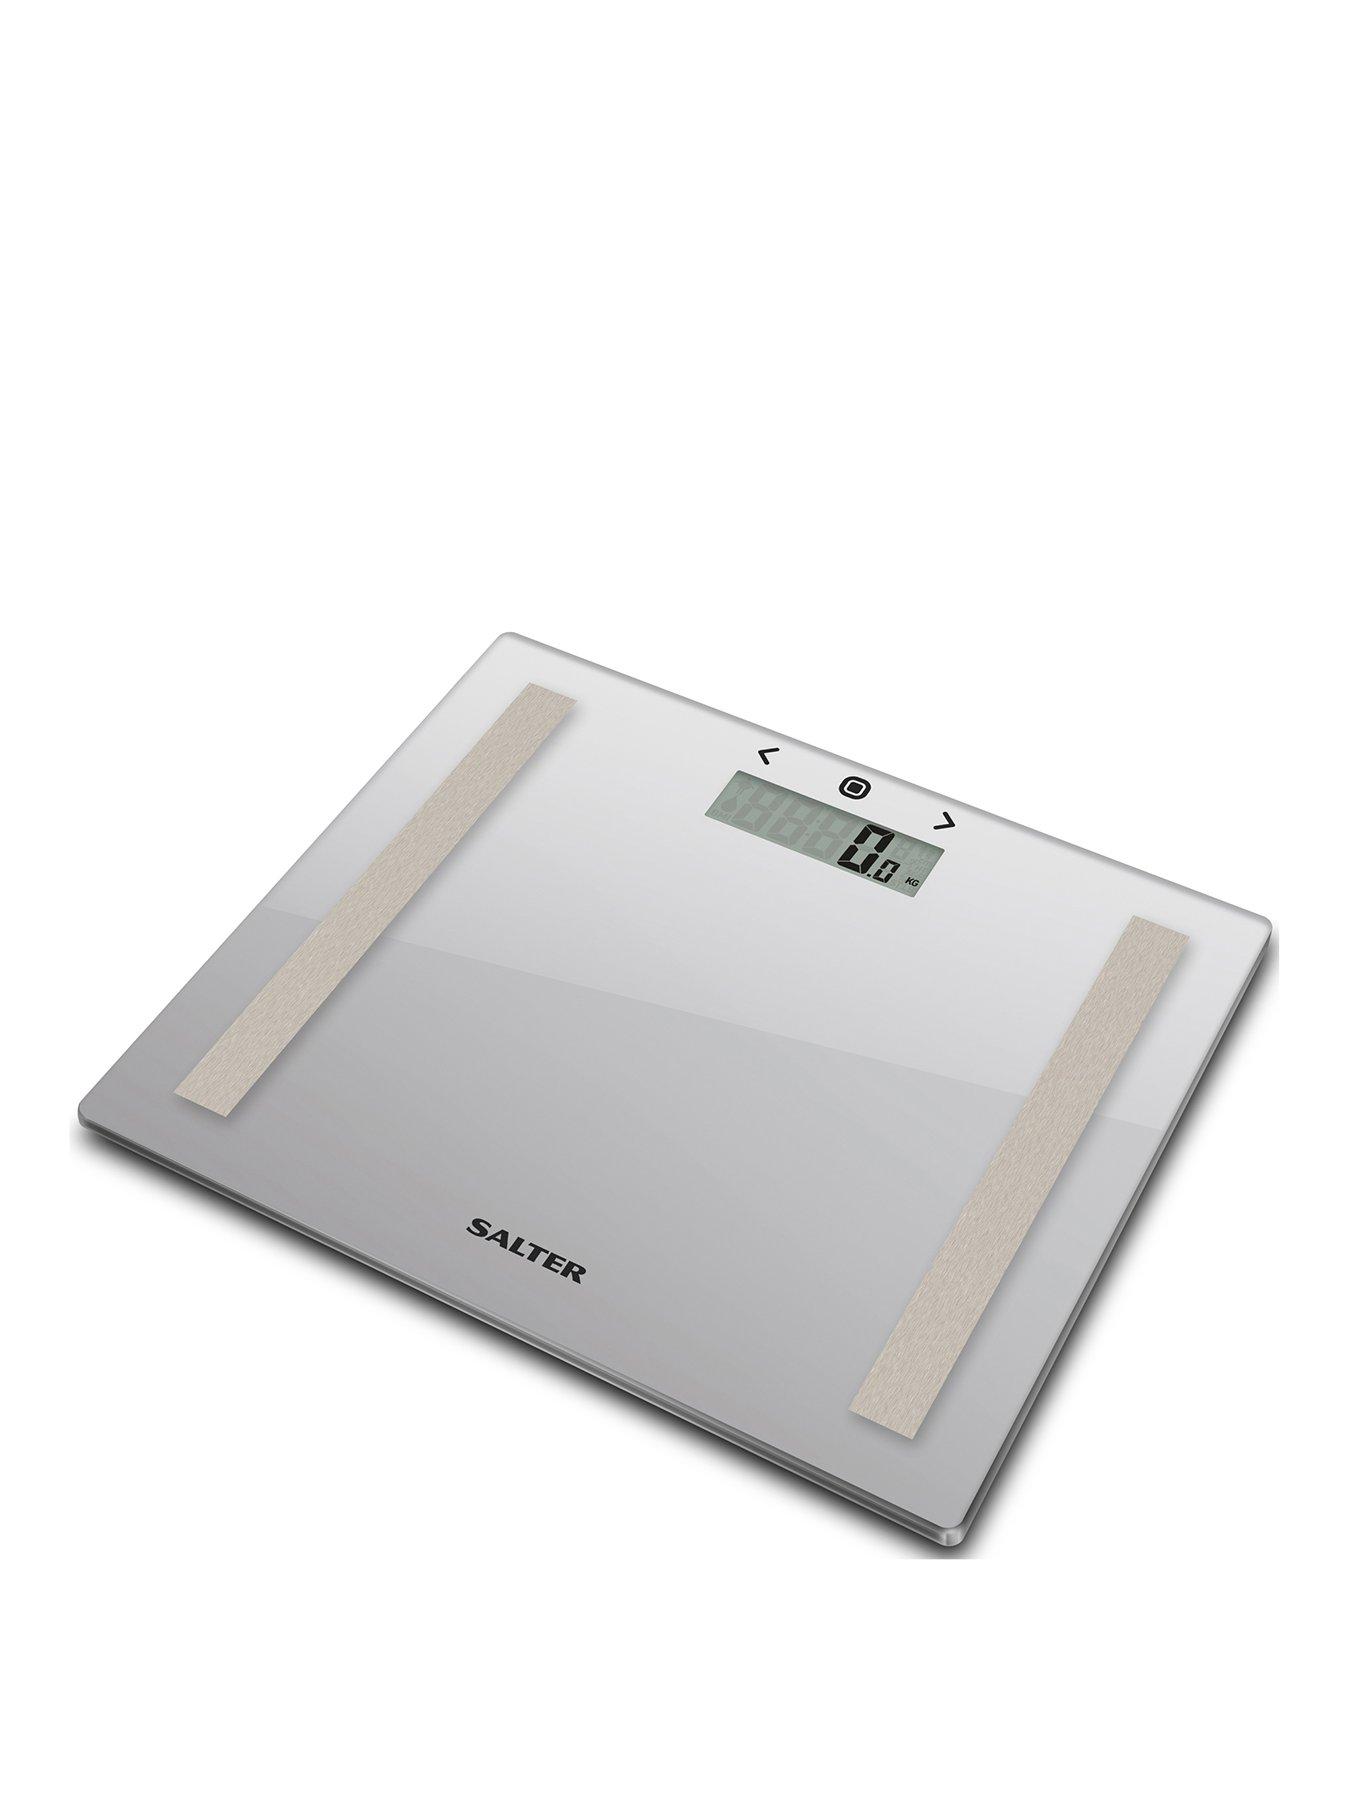 Active Era Digital Body Weight Scale - Ultra Slim High Precision Bathroom  Scale with Tempered Glass, Step-on Technology and Backlit Display - Body